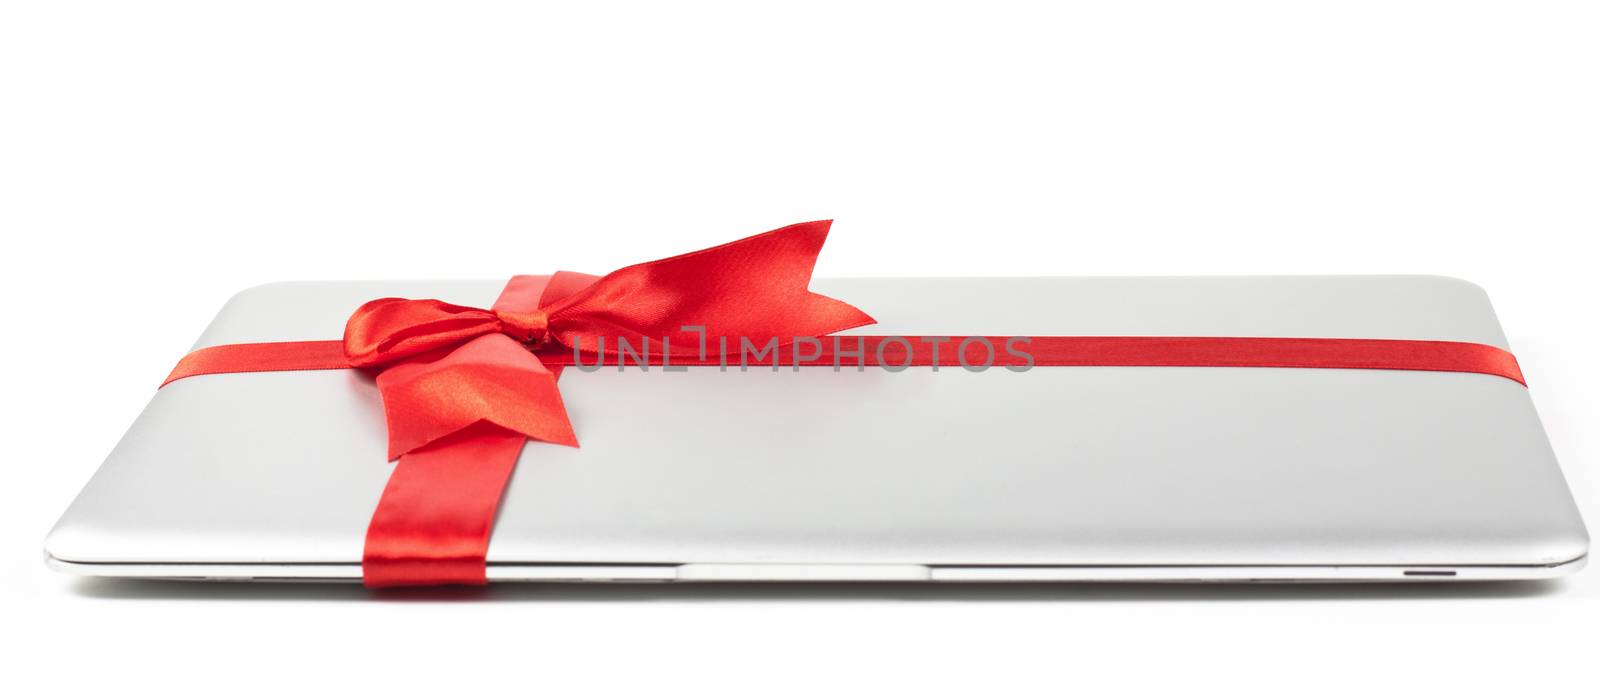 Laptop Gift by orcearo